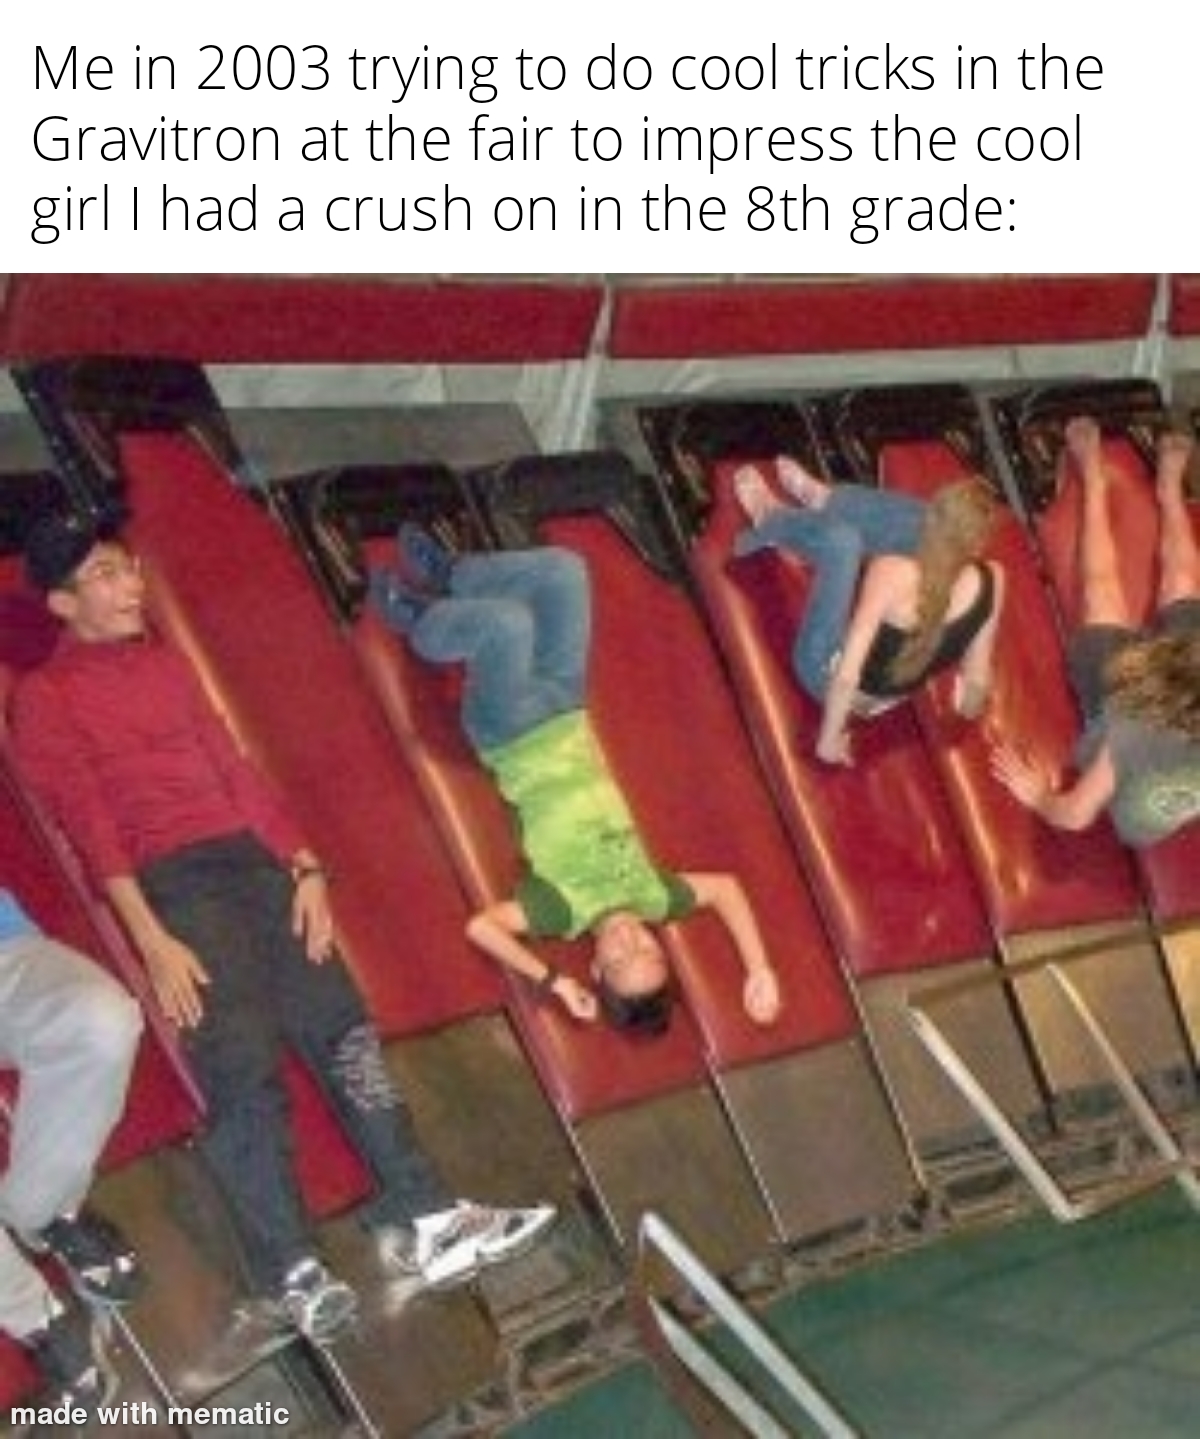 inside gravitron - Me in 2003 trying to do cool tricks in the Gravitron at the fair to impress the cool girl I had a crush on in the 8th grade made with mematic